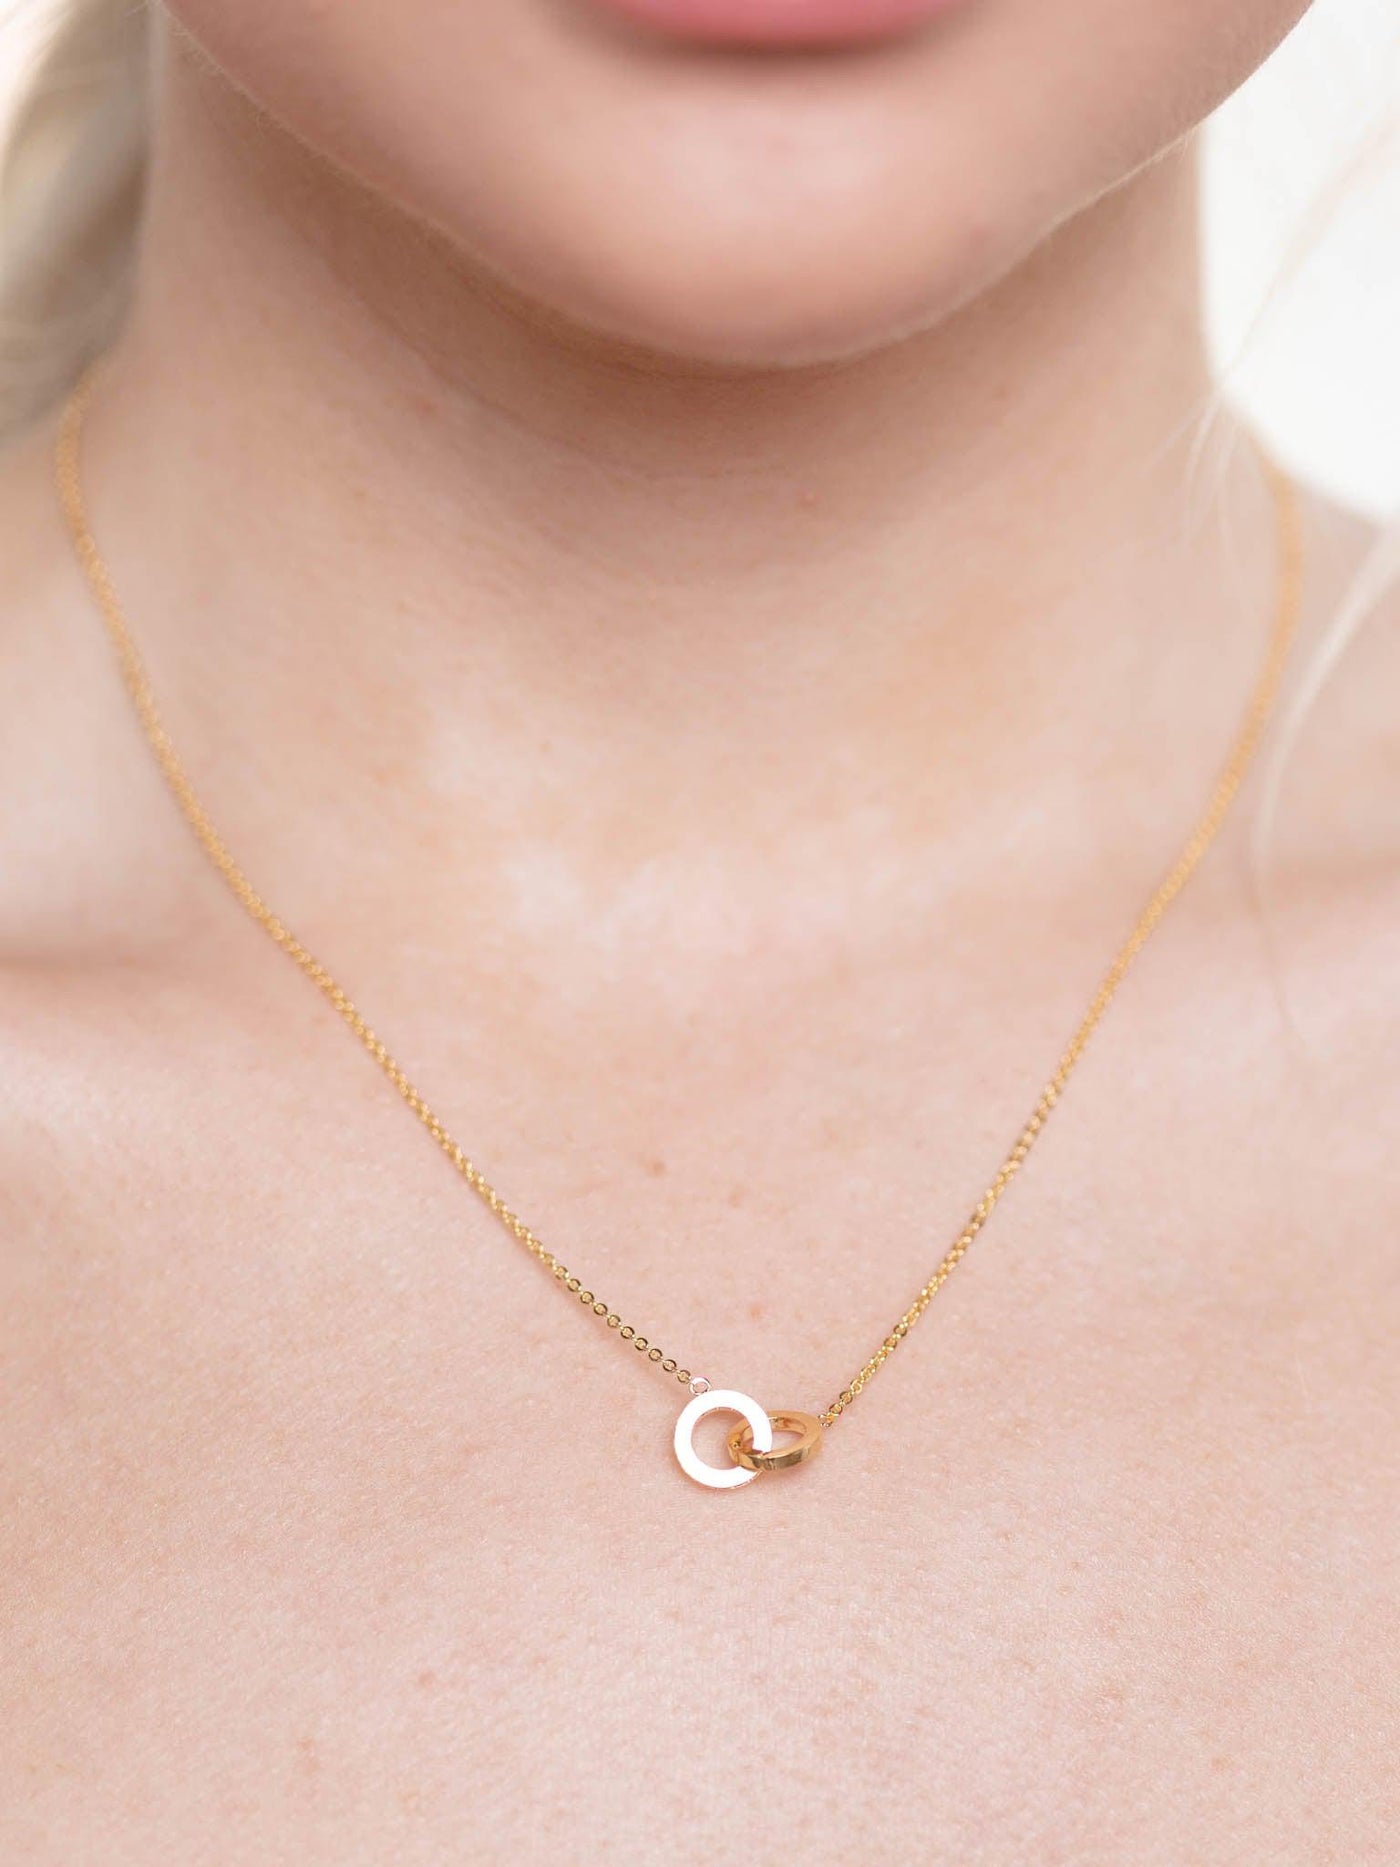 gold linked necklace